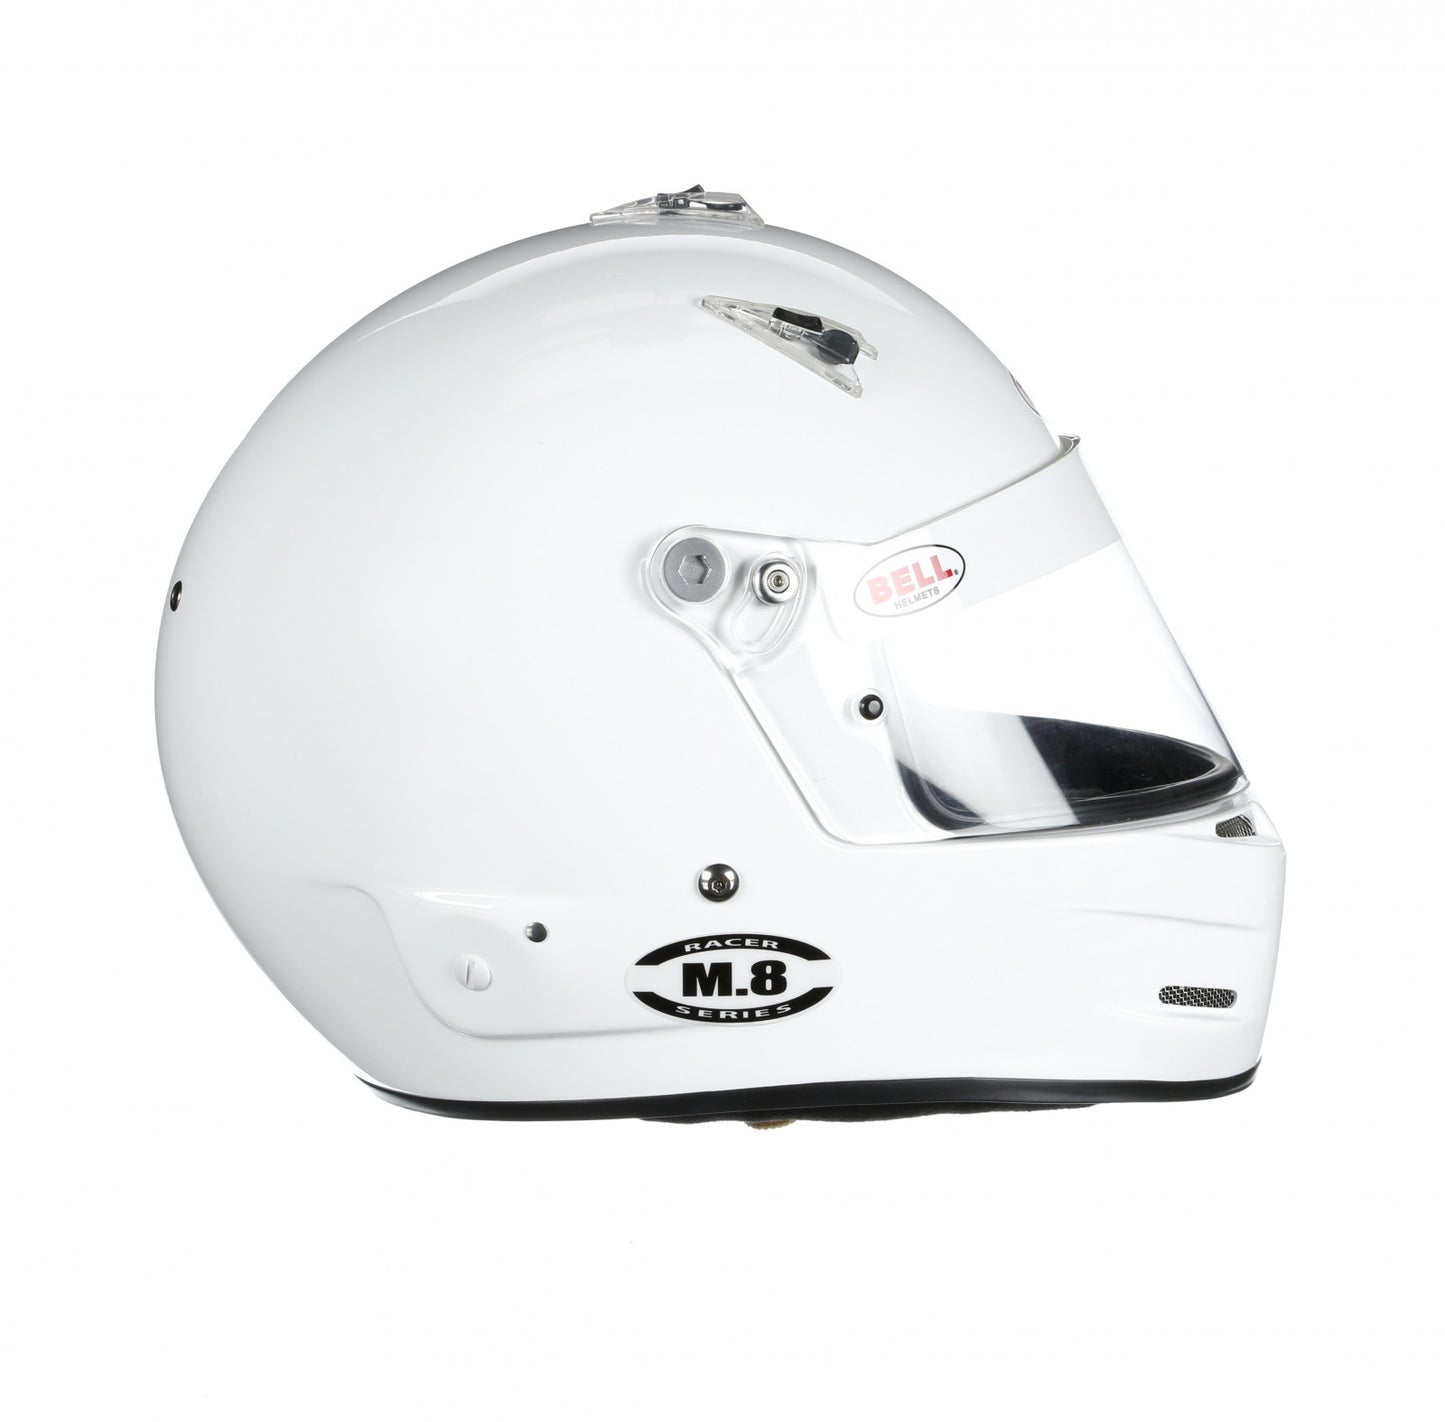 Bell M8 Racing Helmet-White Size Extra Small